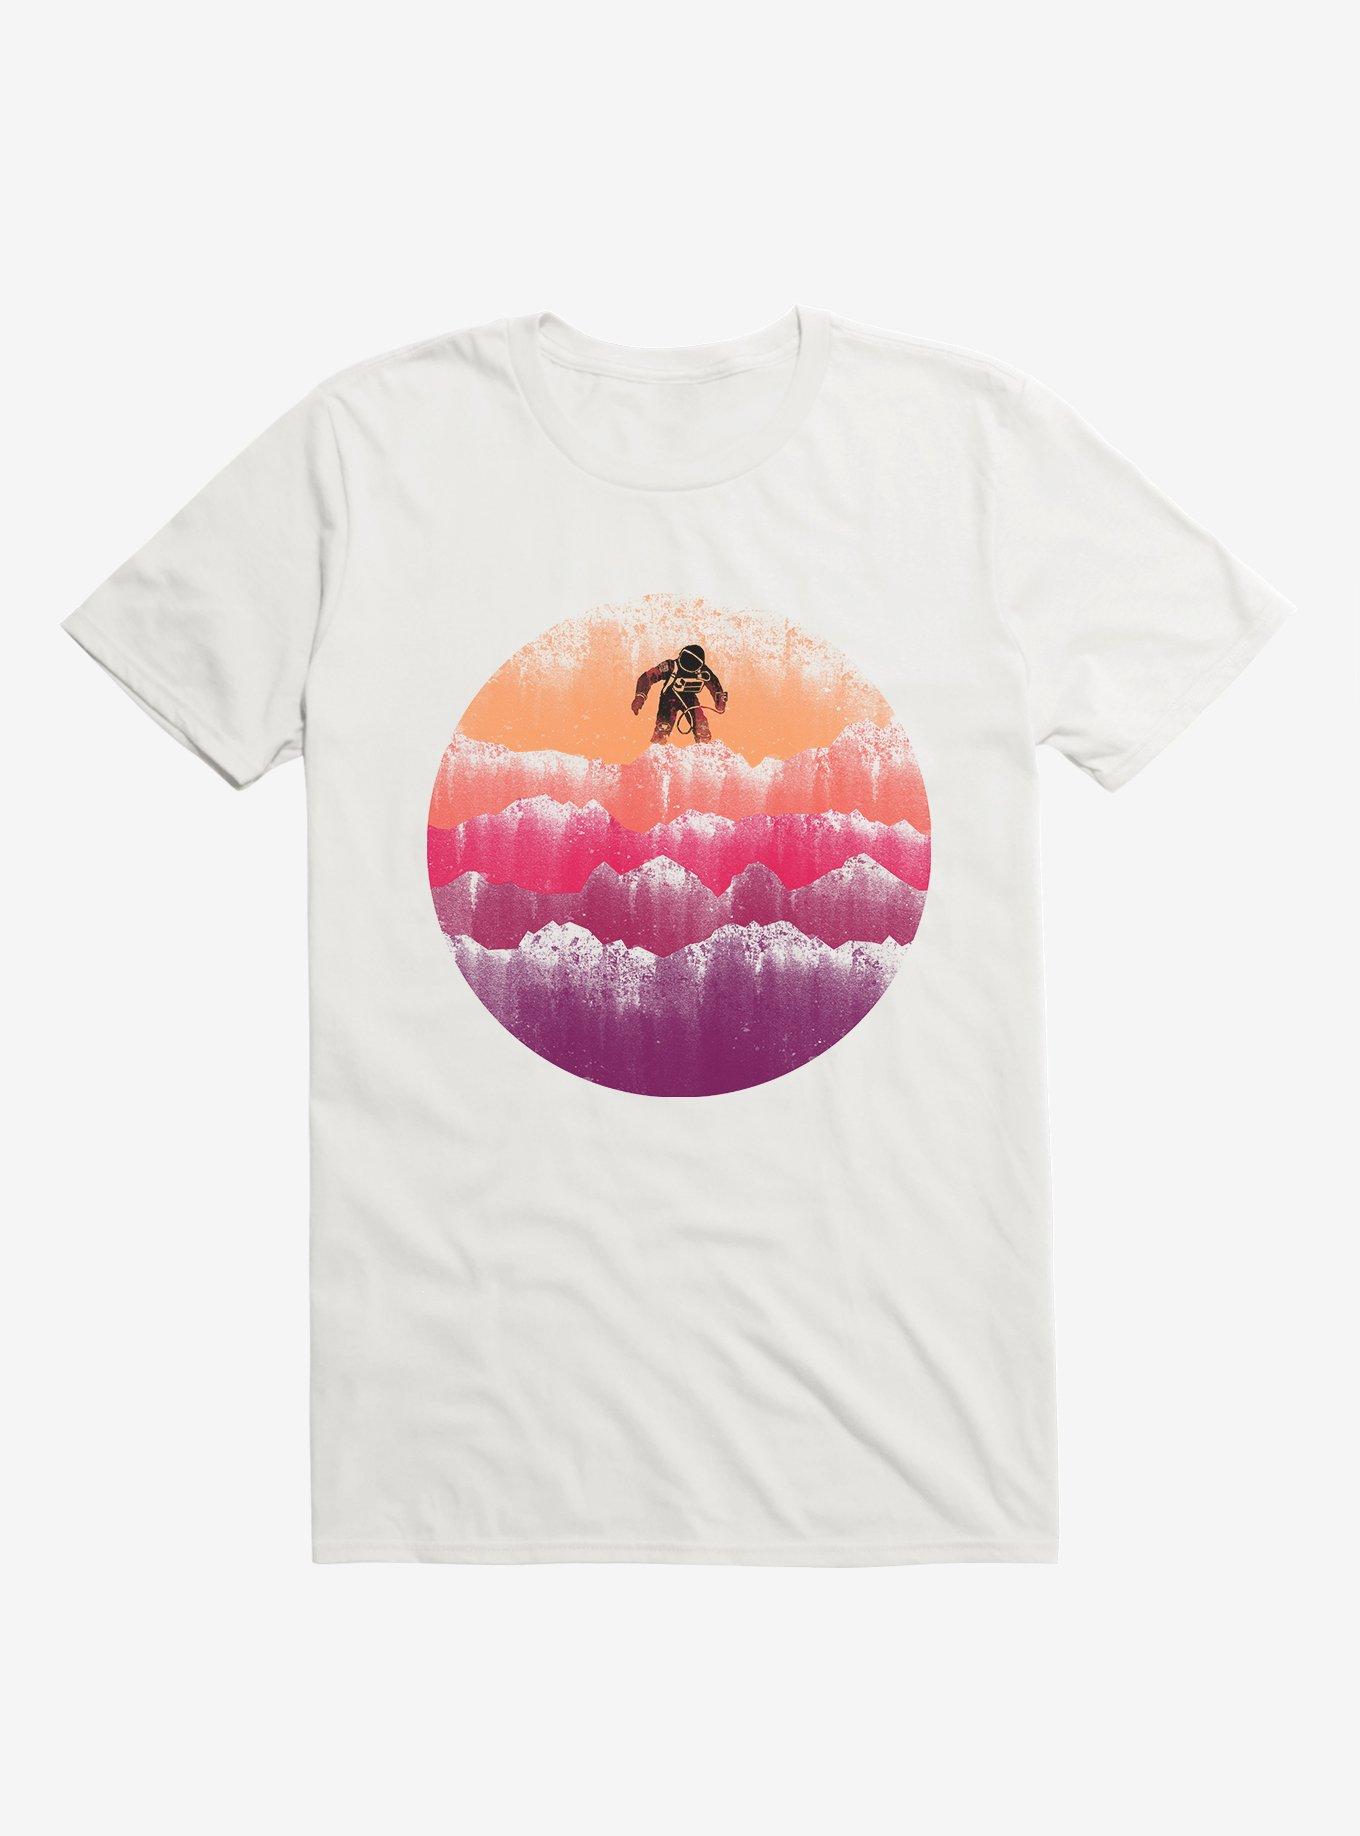 A Scene From Mars Astronaut White T-Shirt, WHITE, hi-res